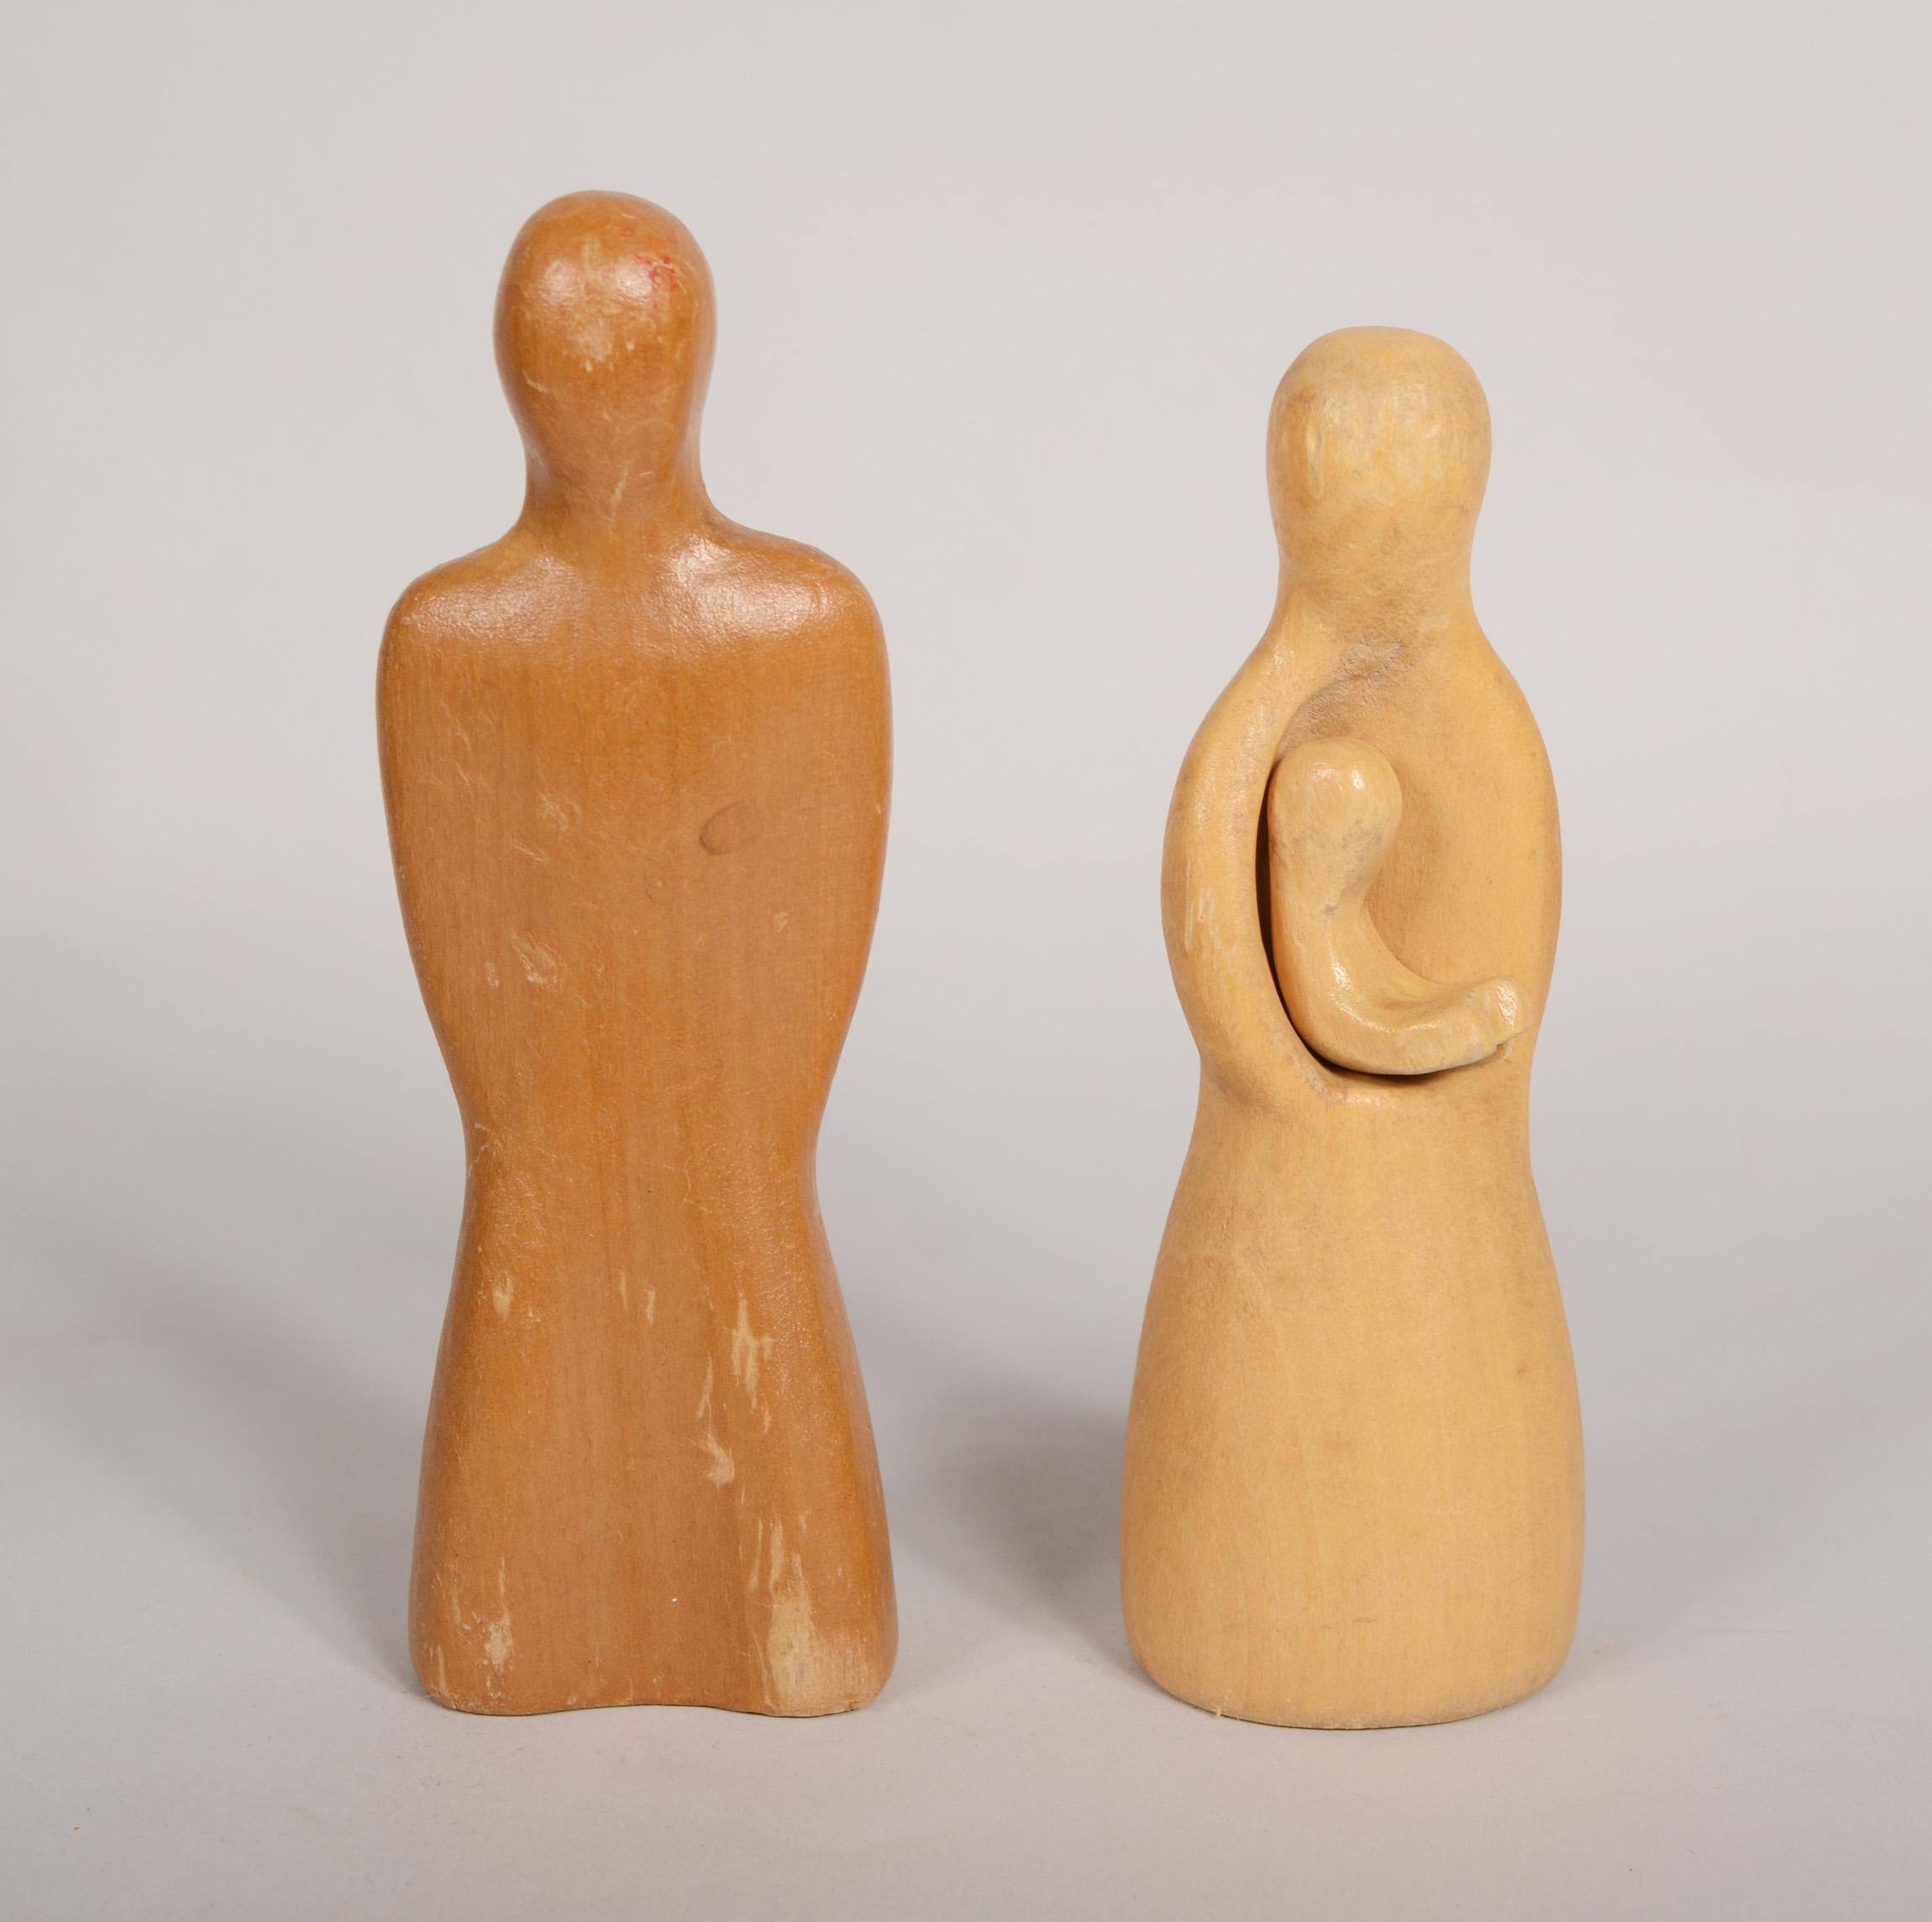 Carved wood toy family by Antonio Vitali, Swiss toy designer. Vitali designed this set for Creative Playthings in 1954. These were marketed under the name Playforms. The set includes a father, a mother holding a baby, boy, girl, cat and dog. These